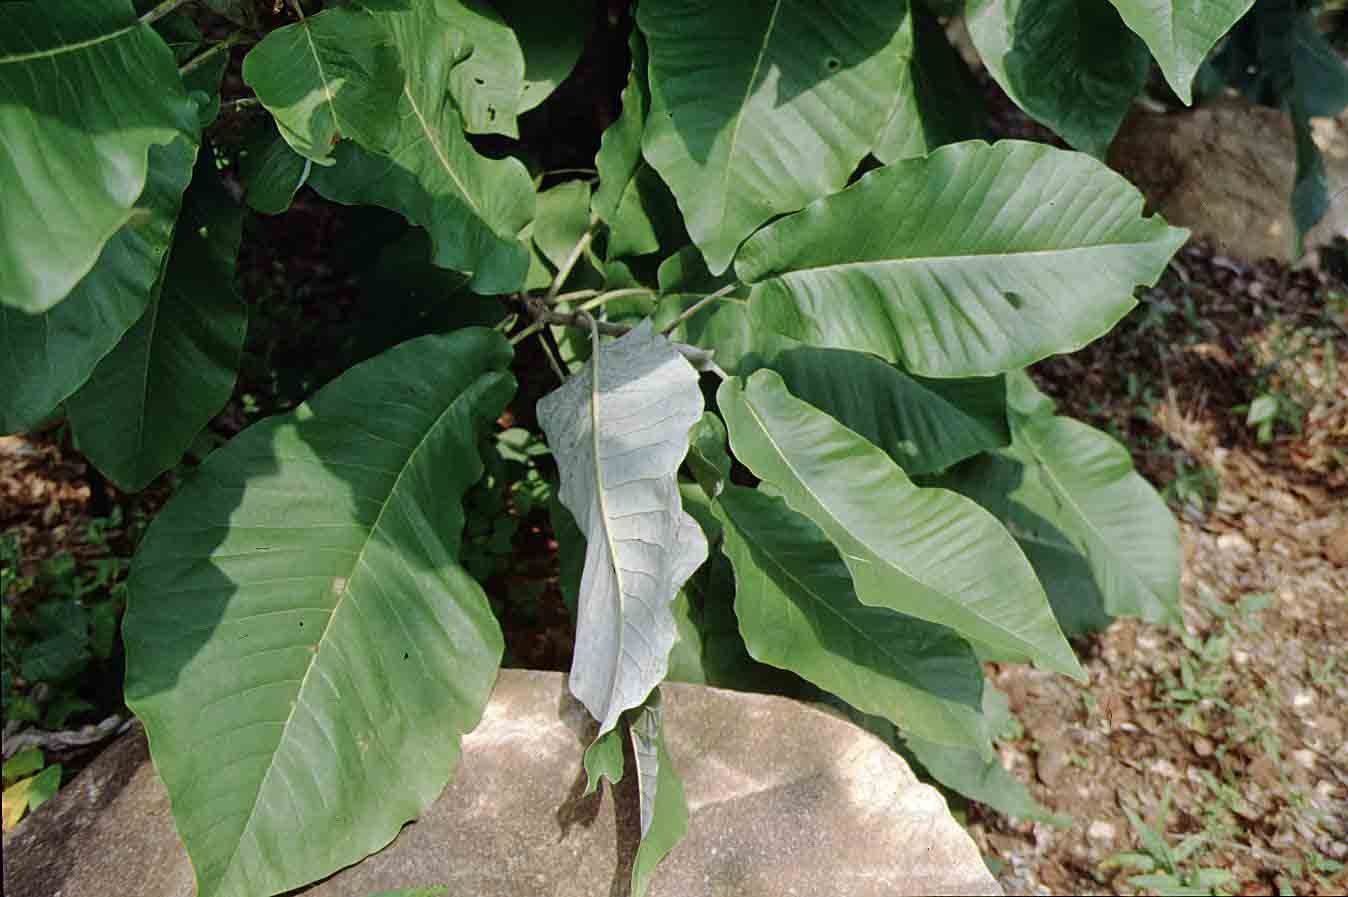 Bigleaf magnolia leaves, up to 30" long and with silvery gray underside